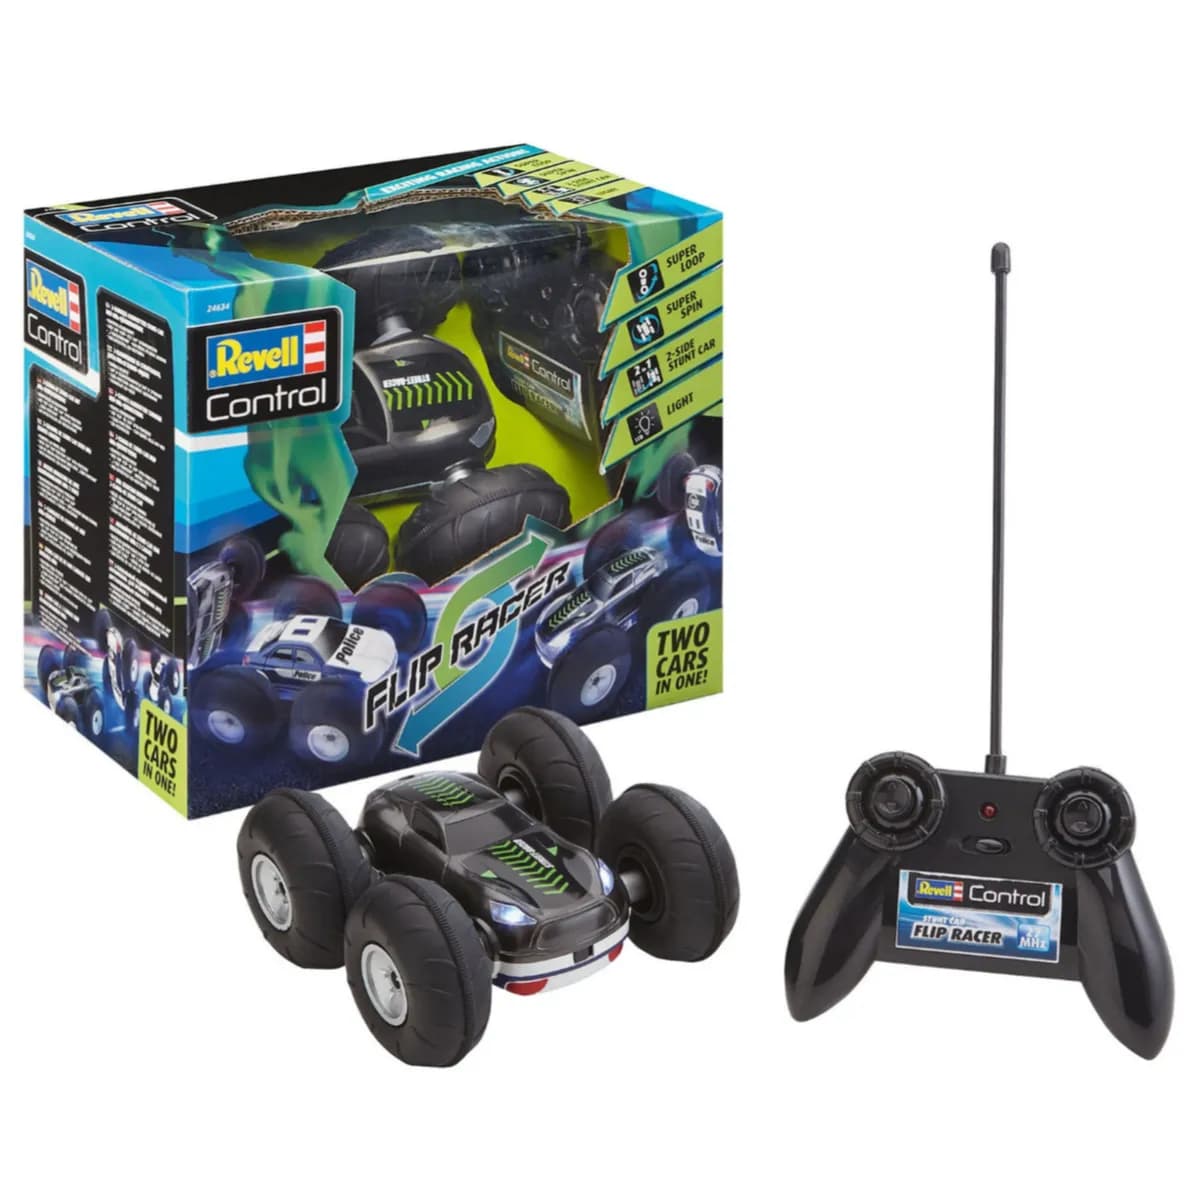 Revell Stunt Car Double Sided FlipRacer Remote Control Car For Kids - RCFS76